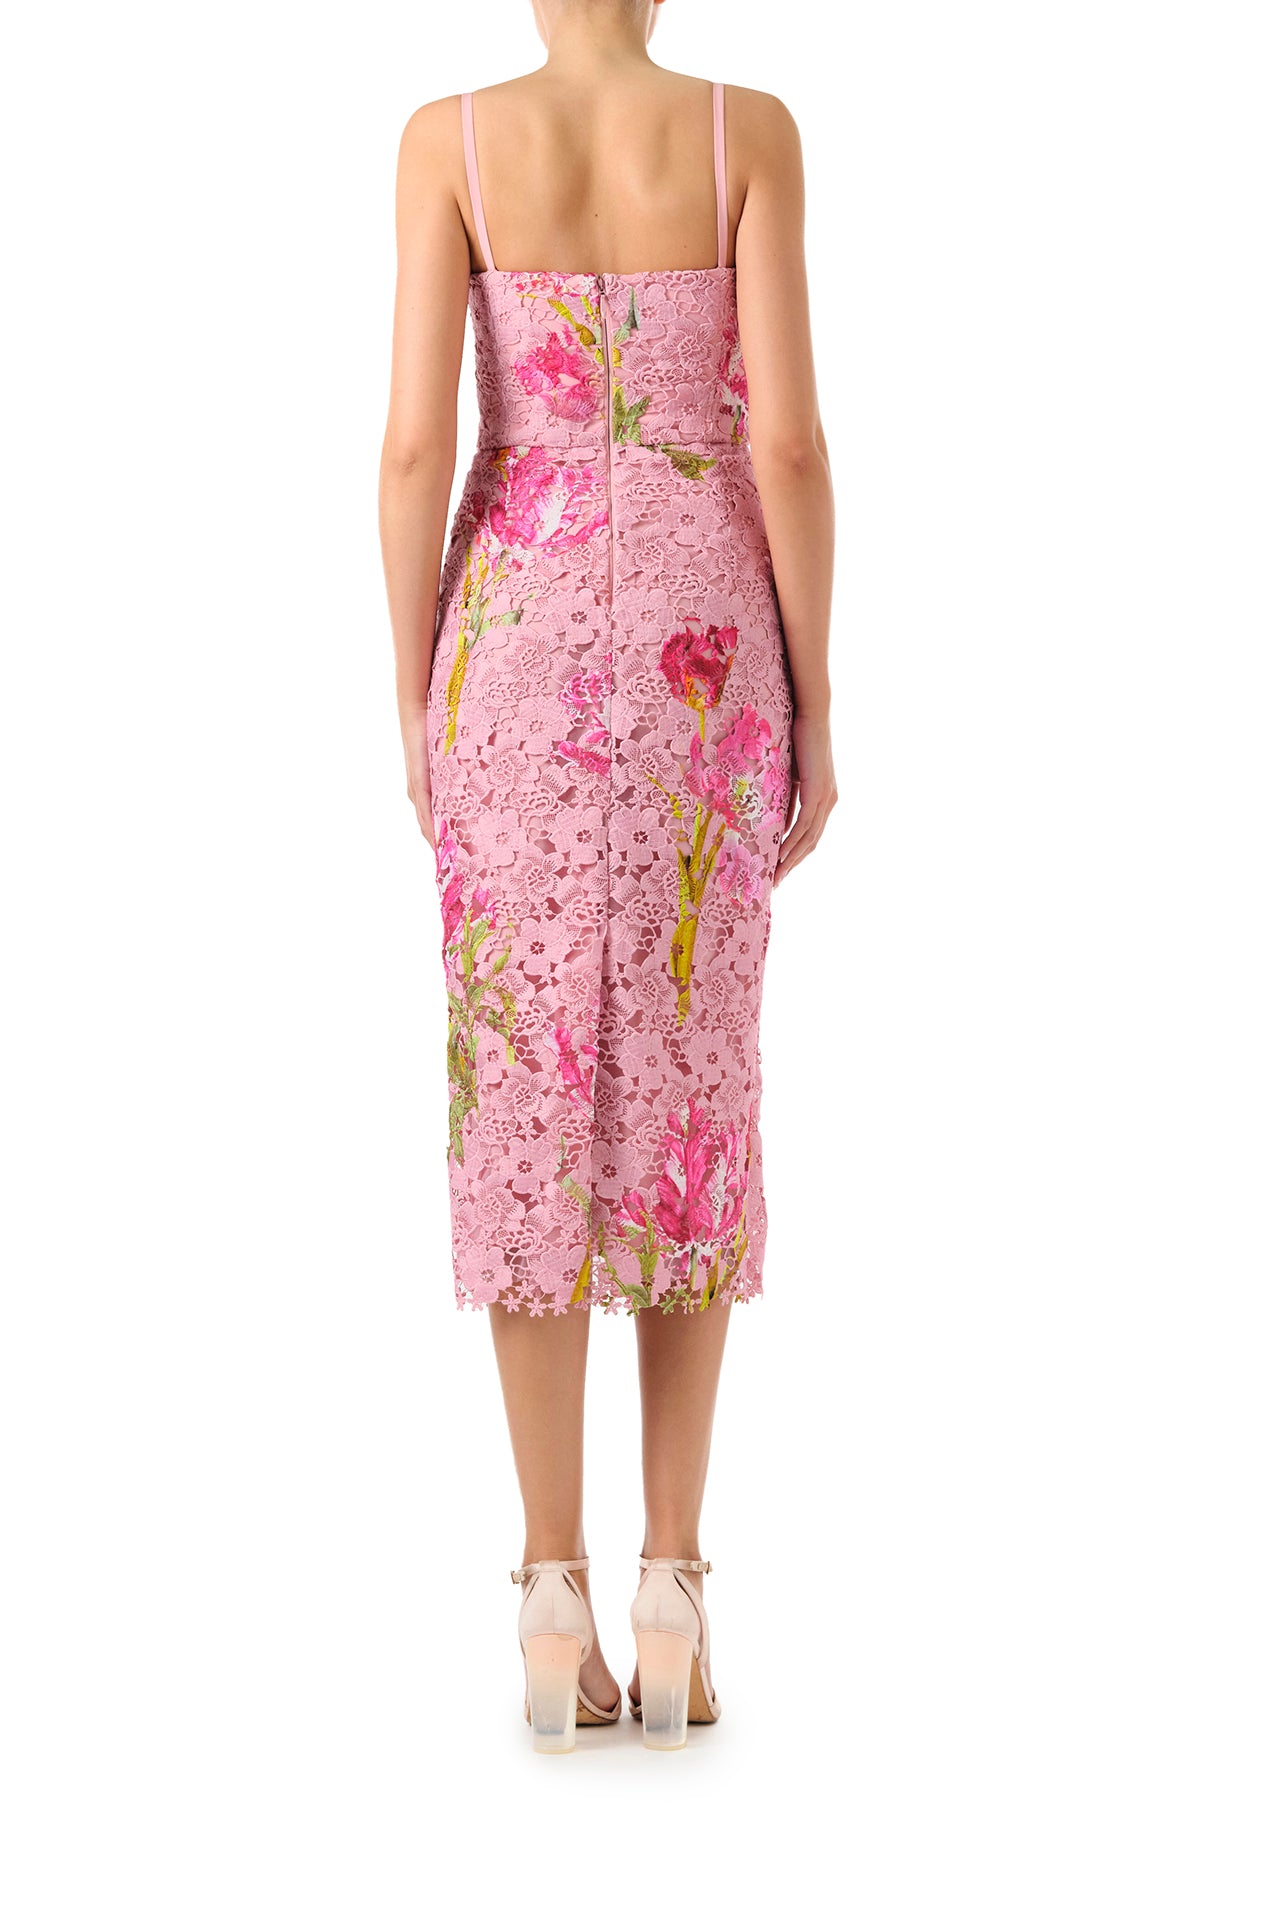 Monique Lhuillier Fall 2024 pink tulip printed lace midi dress with corseted bodice and spaghetti straps - back.